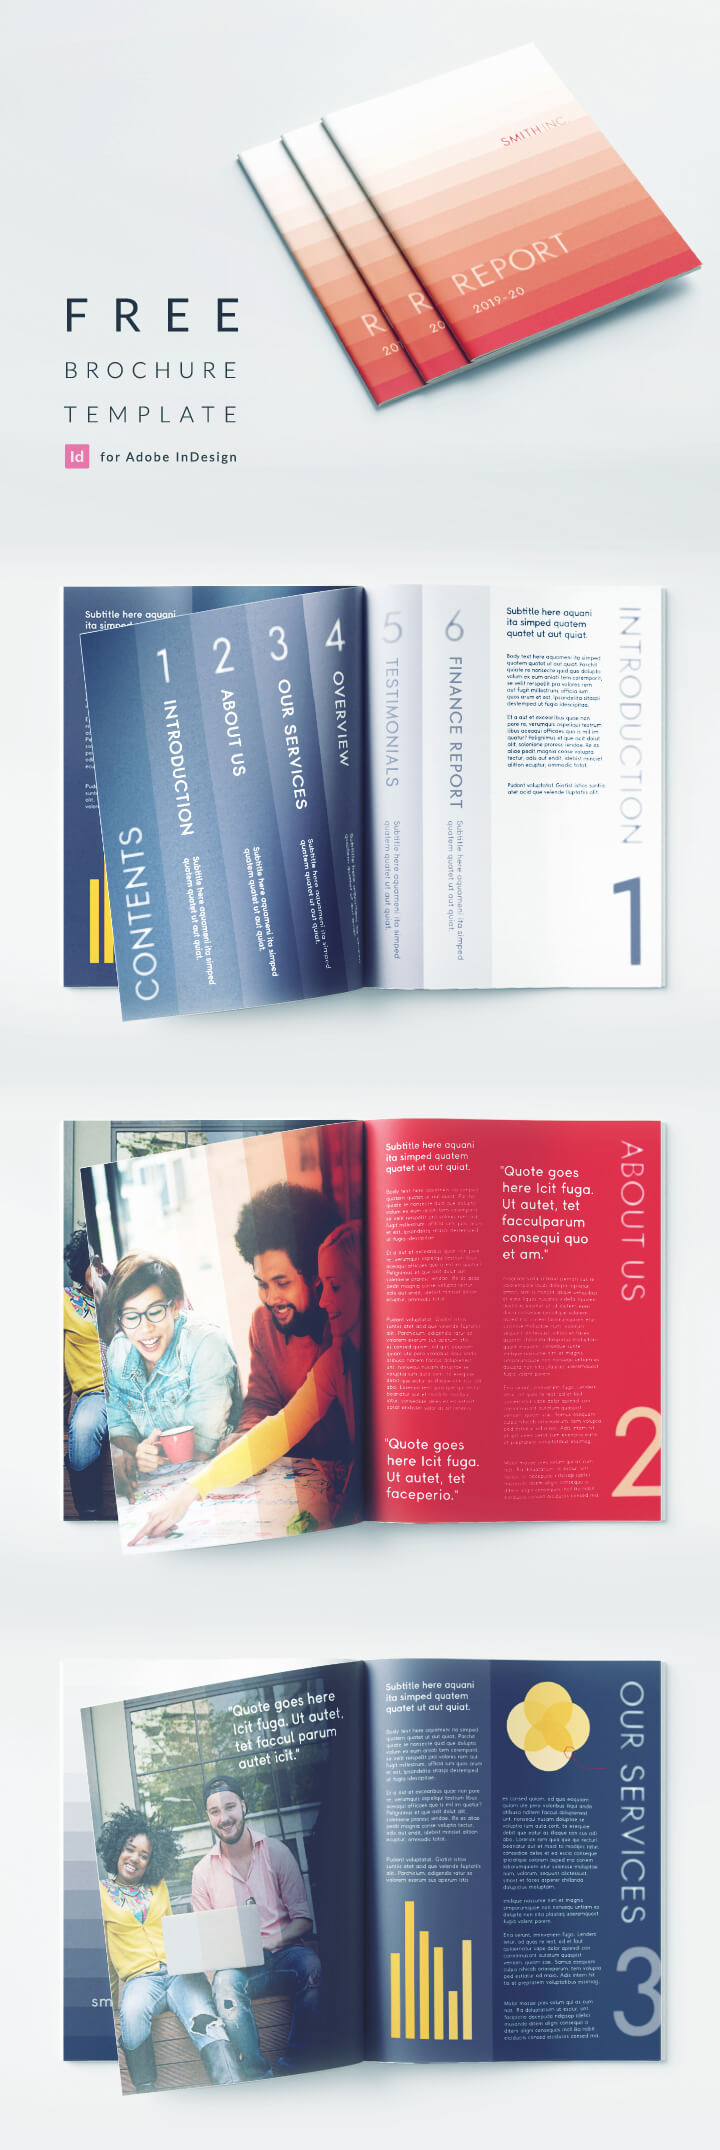 Bi Fold Brochure Template for InDesign with a Corporate theme. Perfect for a business report. Free download for InDesign, smart red and blue corporate color scheme.